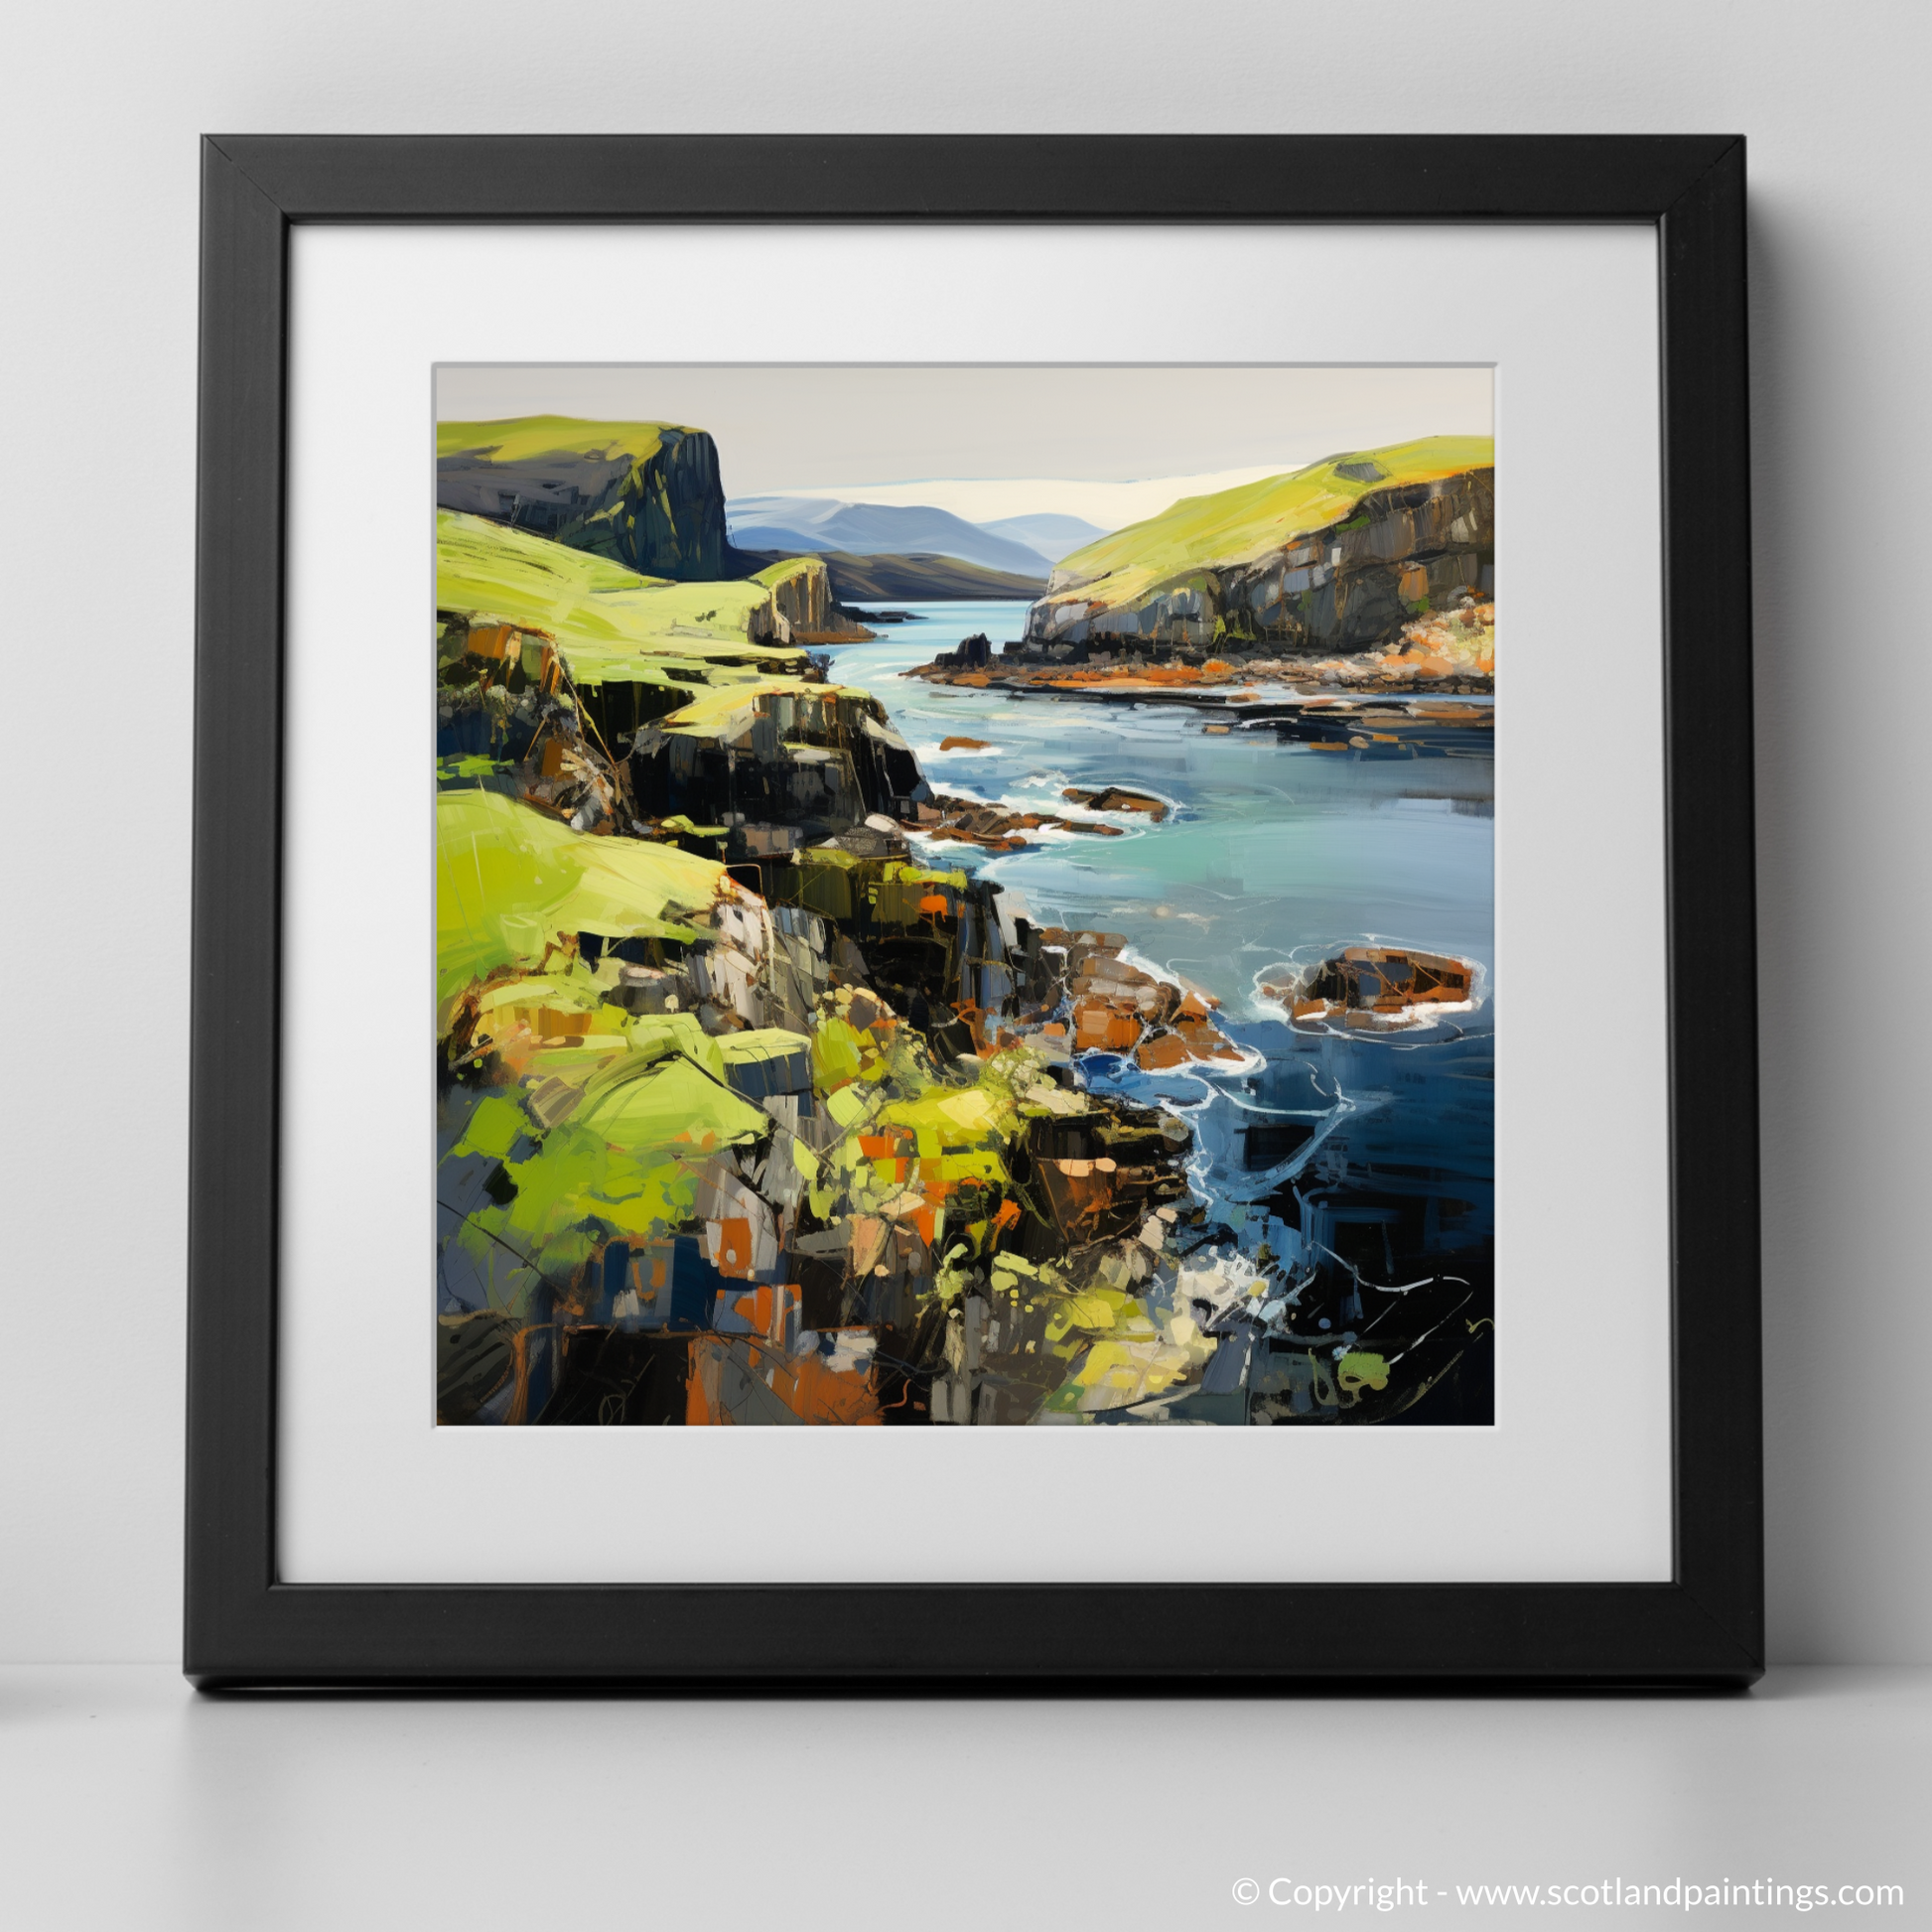 Art Print of Easdale Sound, Easdale, Argyll and Bute with a black frame